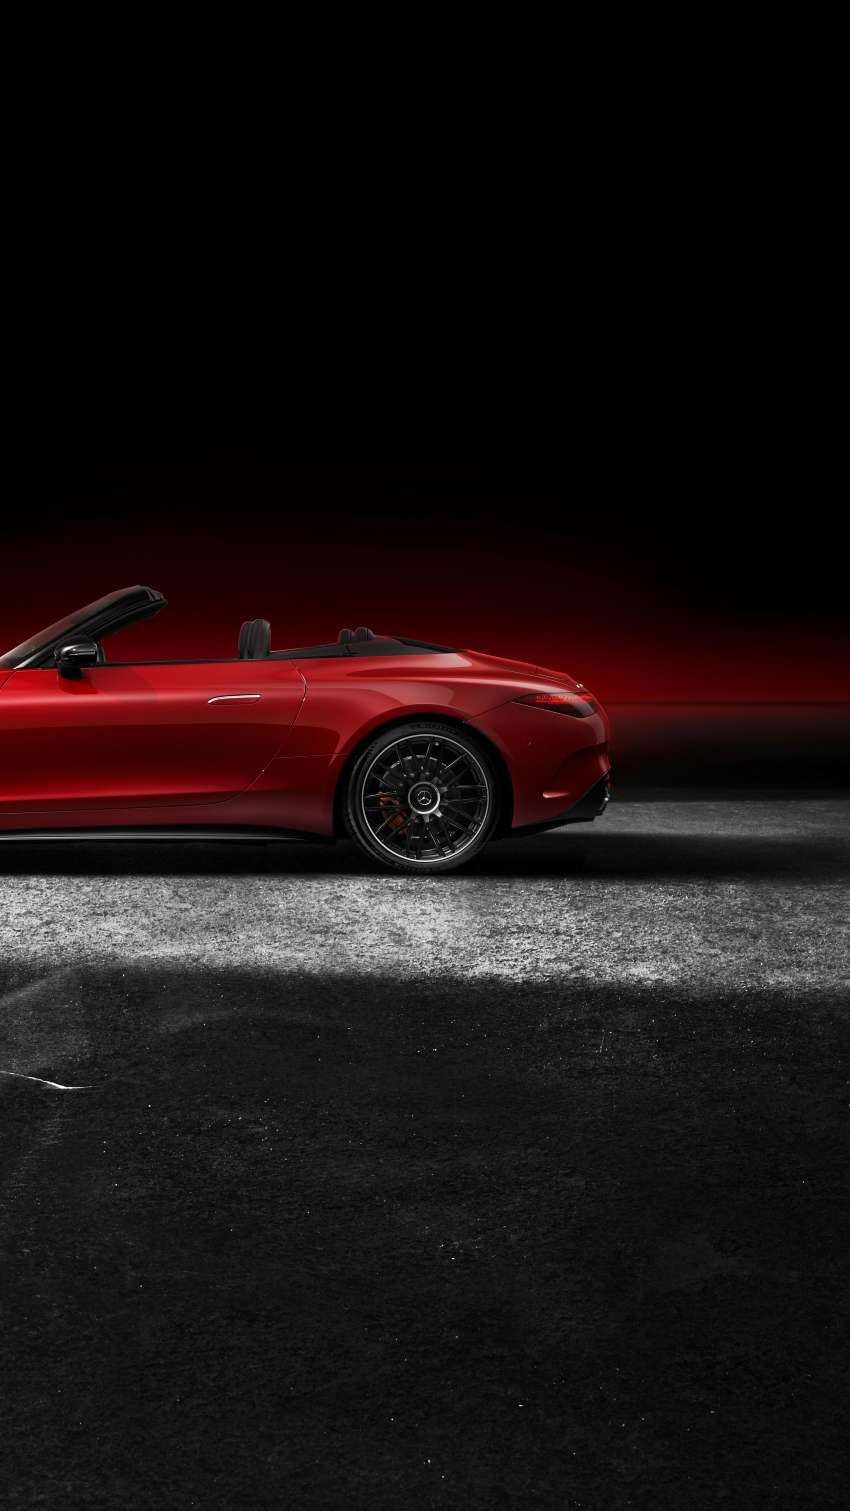 2022 Mercedes-AMG SL revealed – R232 developed by Affalterbach, 476 PS SL55, 585 PS SL63, PHEV later Image #1369268